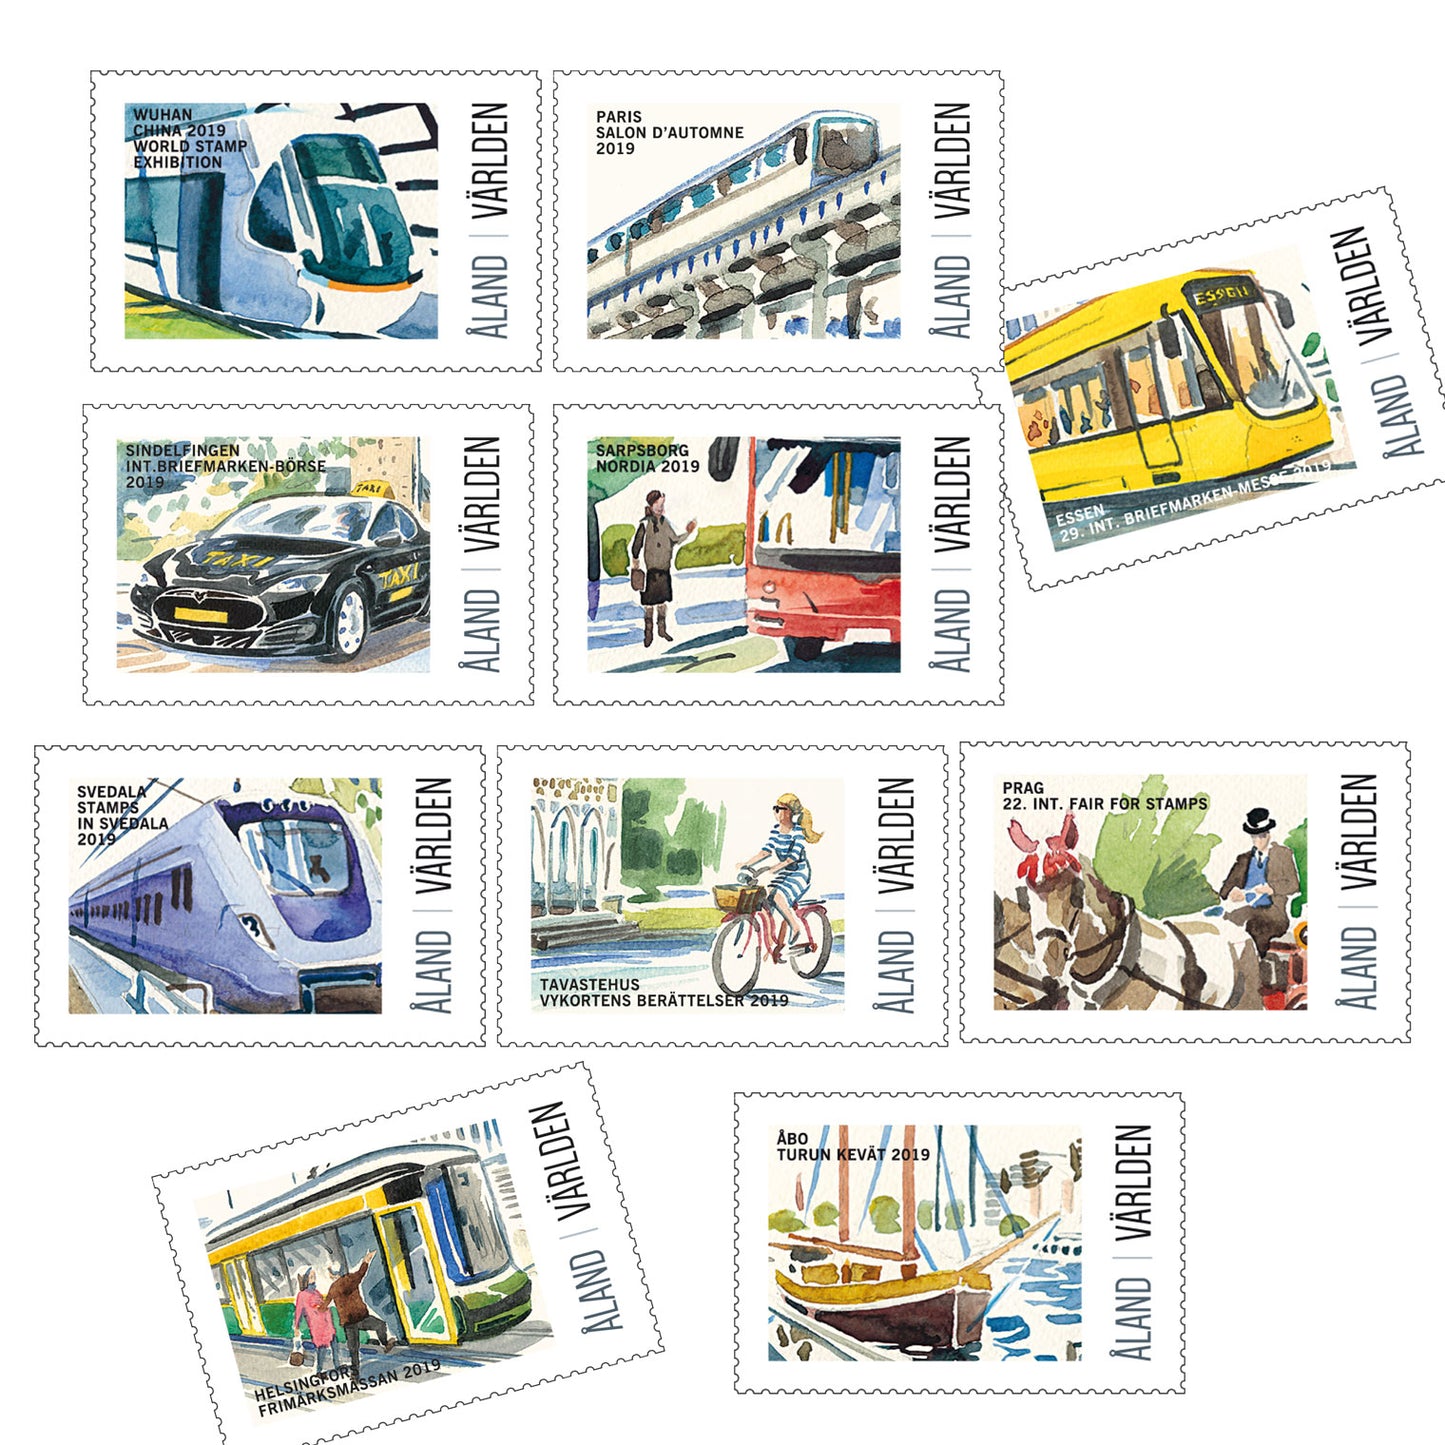 Exhibition stamps 2019, singles